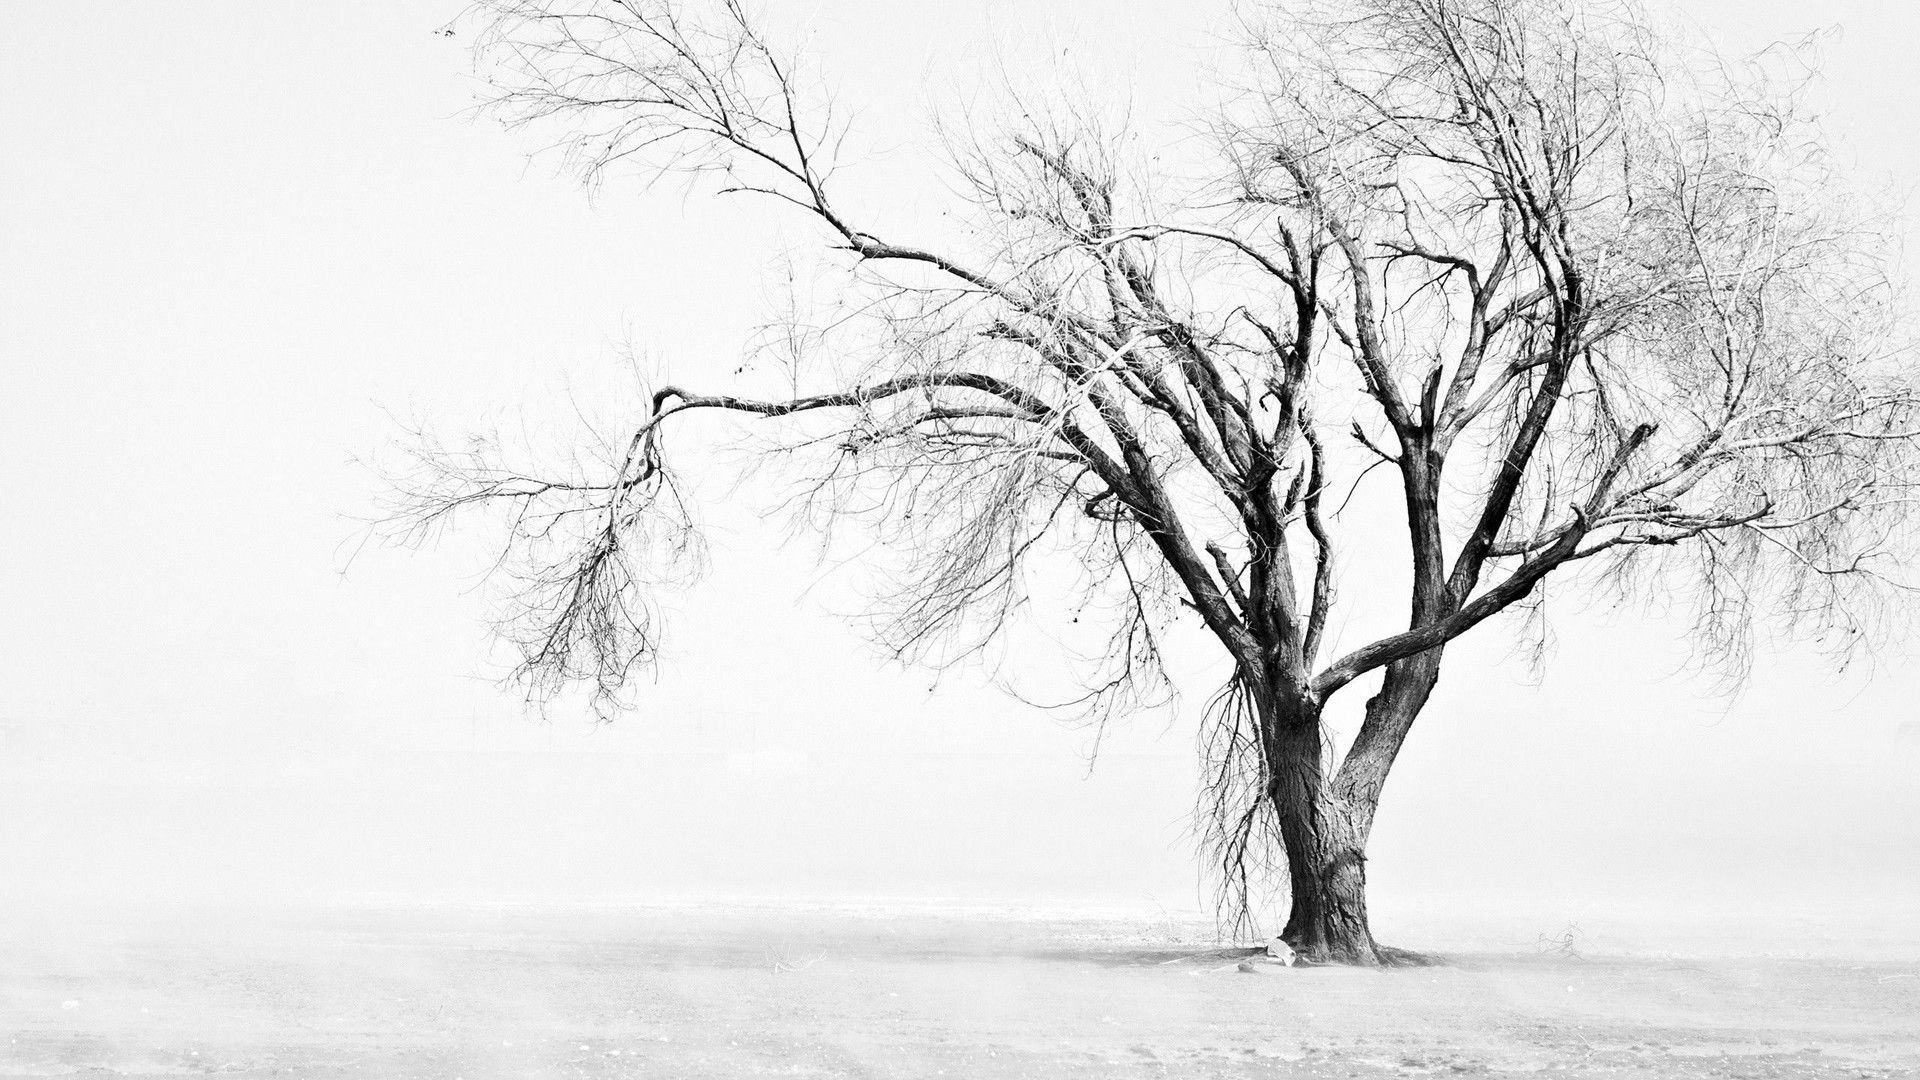 A lone tree stands in a snow-covered field on a foggy winter day. - Laptop, white